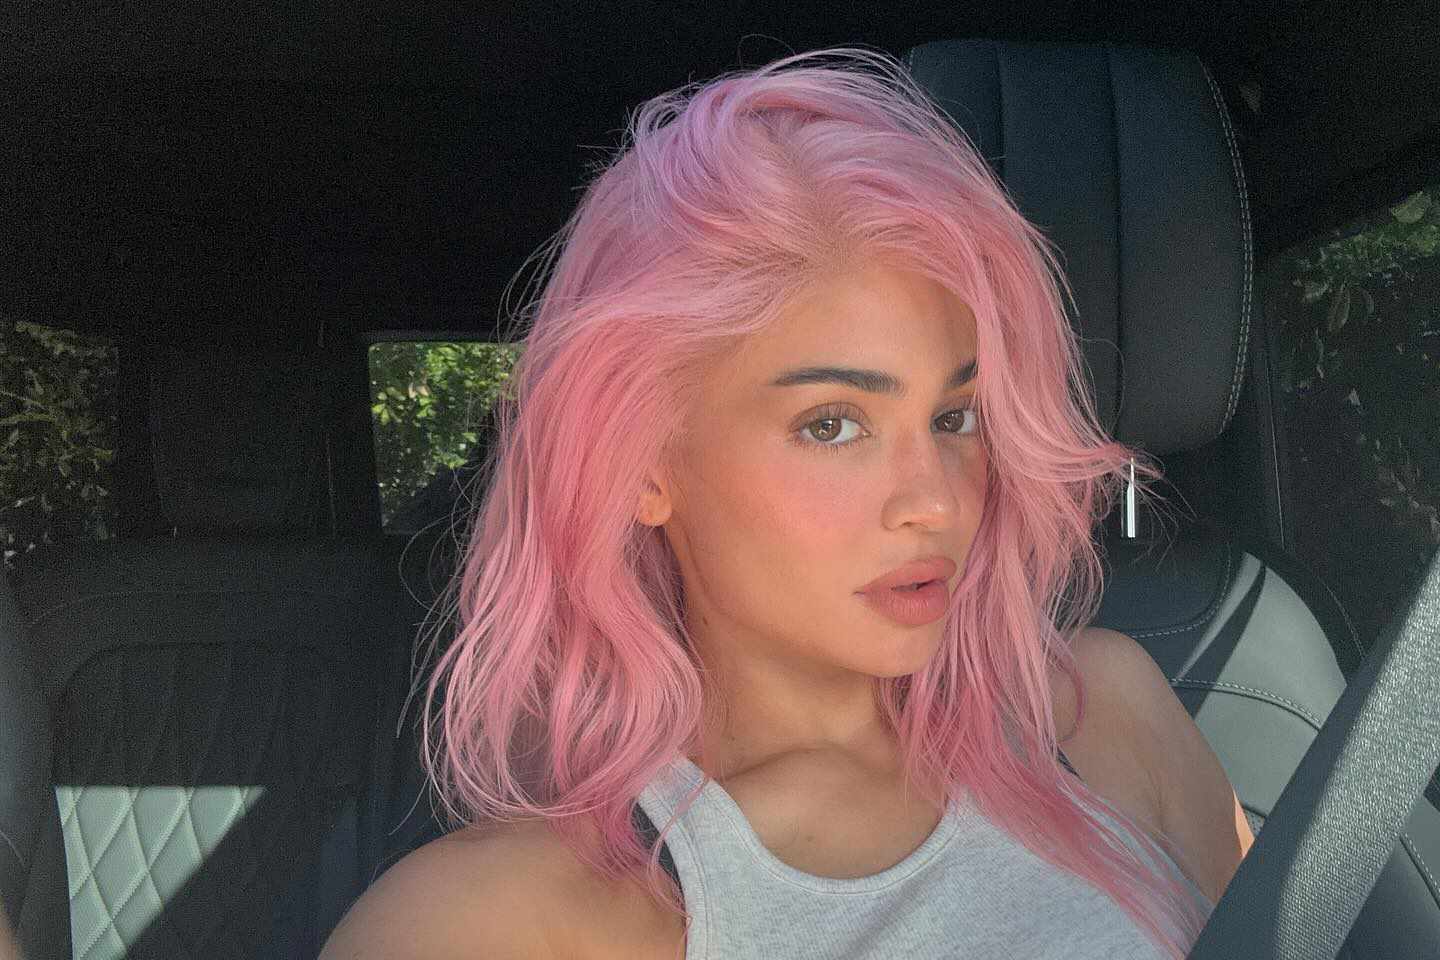 Kylie Jenner takes a selfie in a car with pink hair